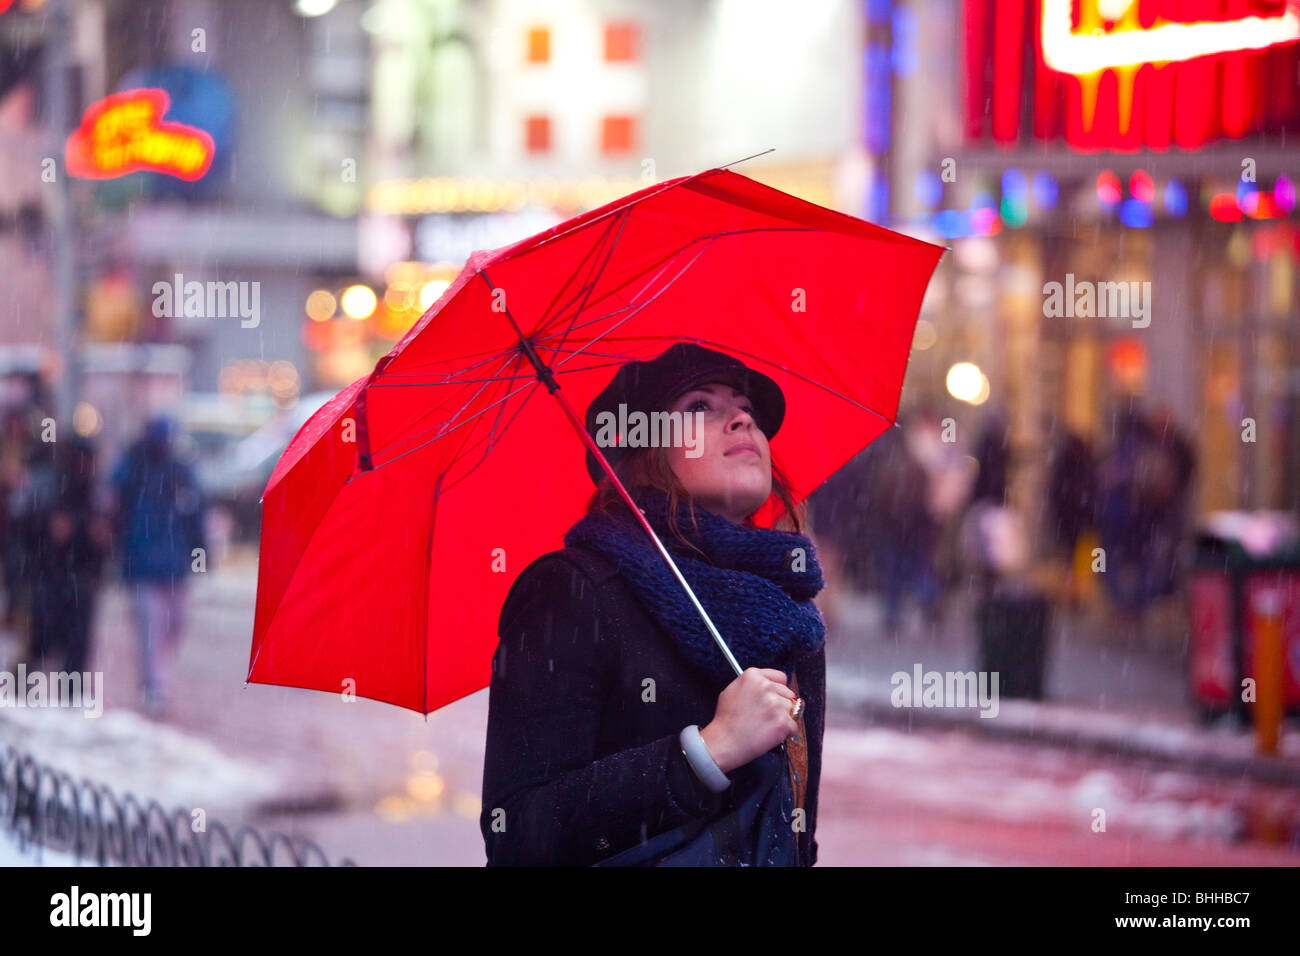 Snowing on a woman in Times Square, New York City Stock Photo